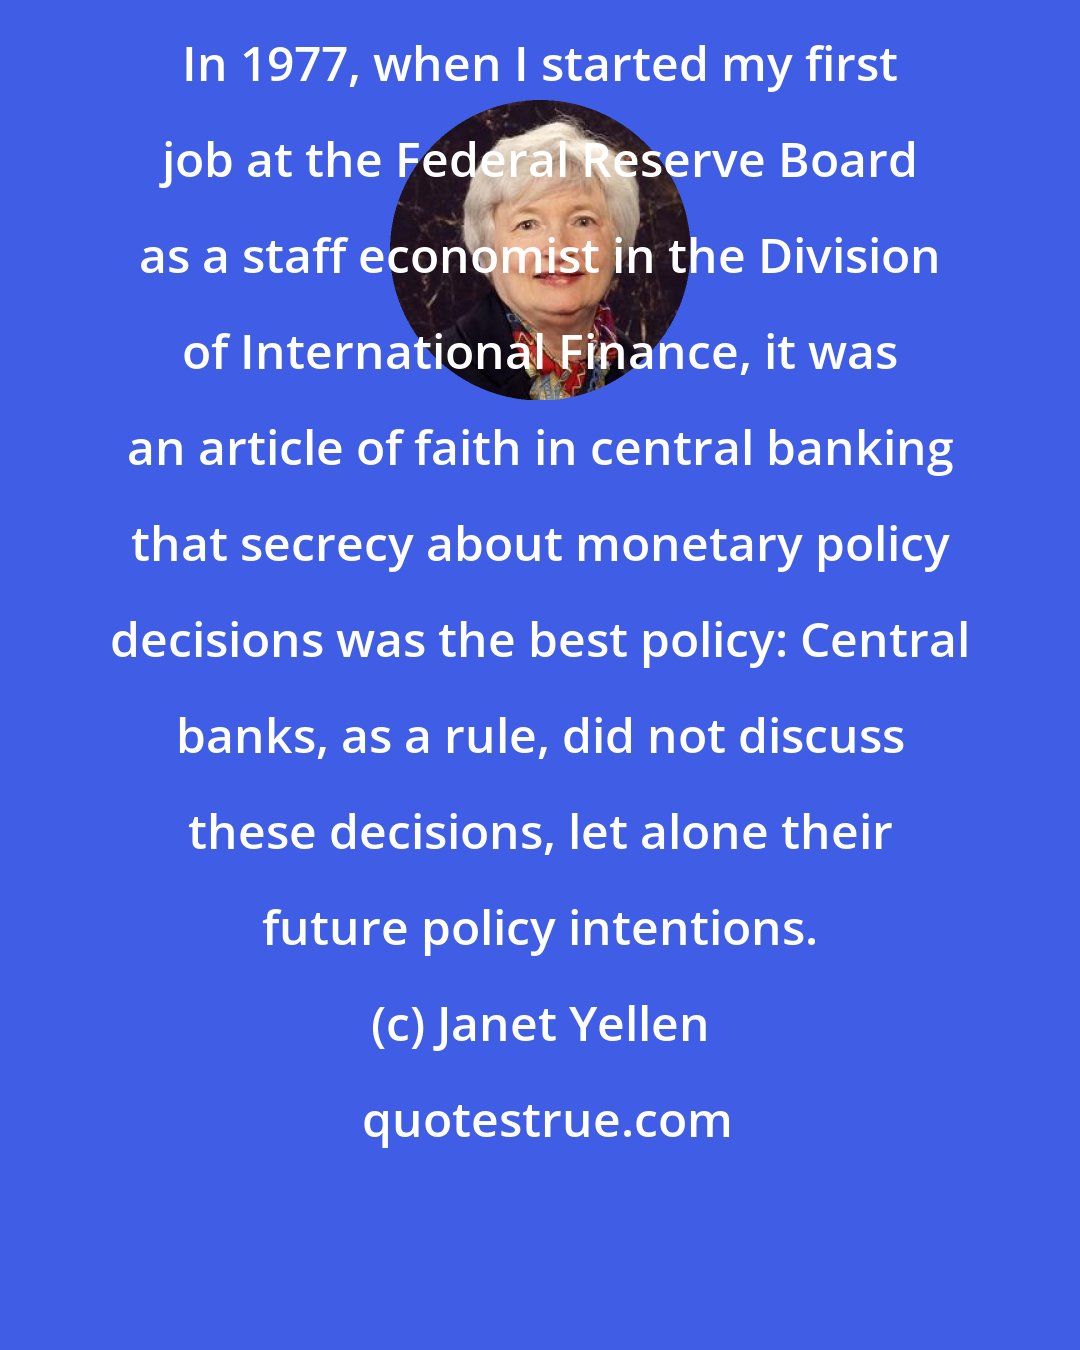 Janet Yellen: In 1977, when I started my first job at the Federal Reserve Board as a staff economist in the Division of International Finance, it was an article of faith in central banking that secrecy about monetary policy decisions was the best policy: Central banks, as a rule, did not discuss these decisions, let alone their future policy intentions.